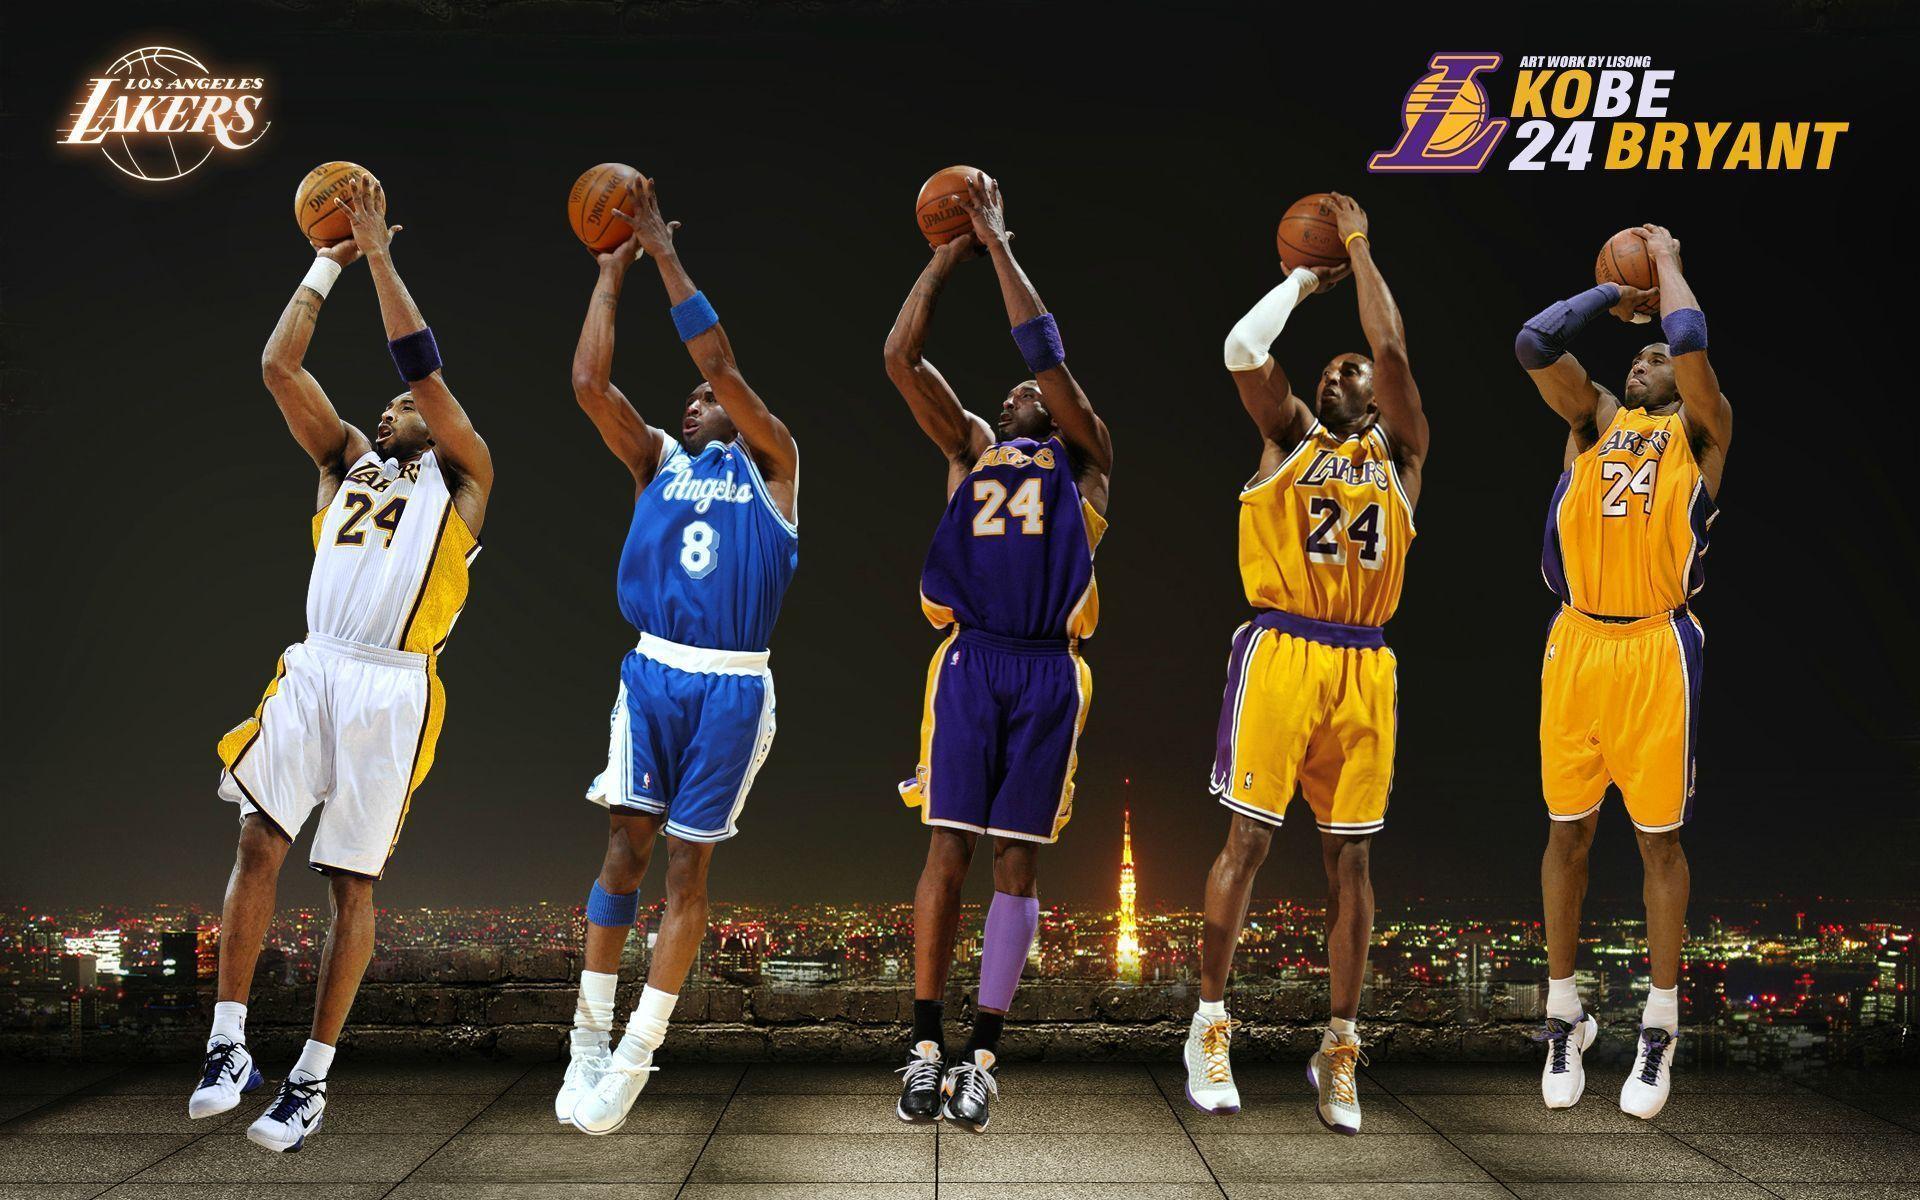 2014 15 Official Lakers Season Thread, Vol: We Love Each Other